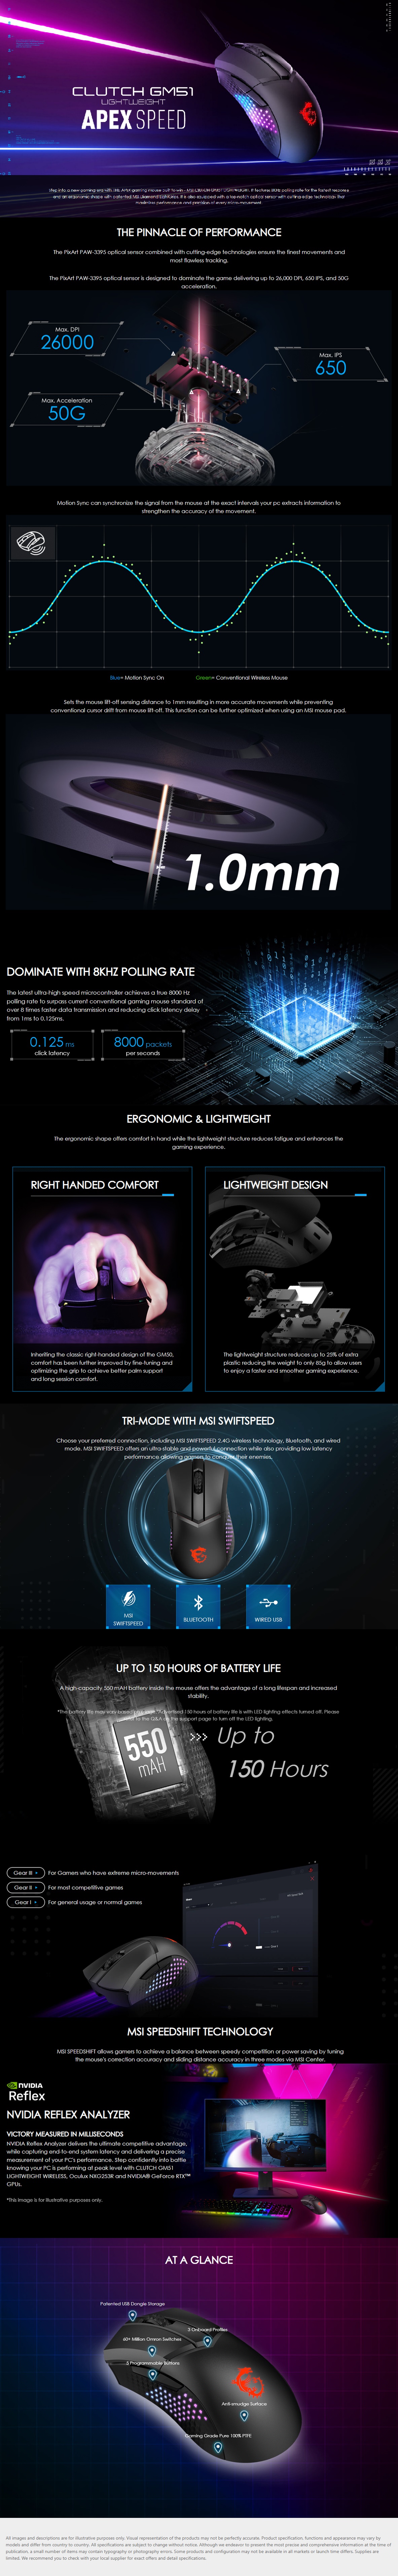 A large marketing image providing additional information about the product MSI Clutch GM51 Lightweight Gaming Mouse - Additional alt info not provided